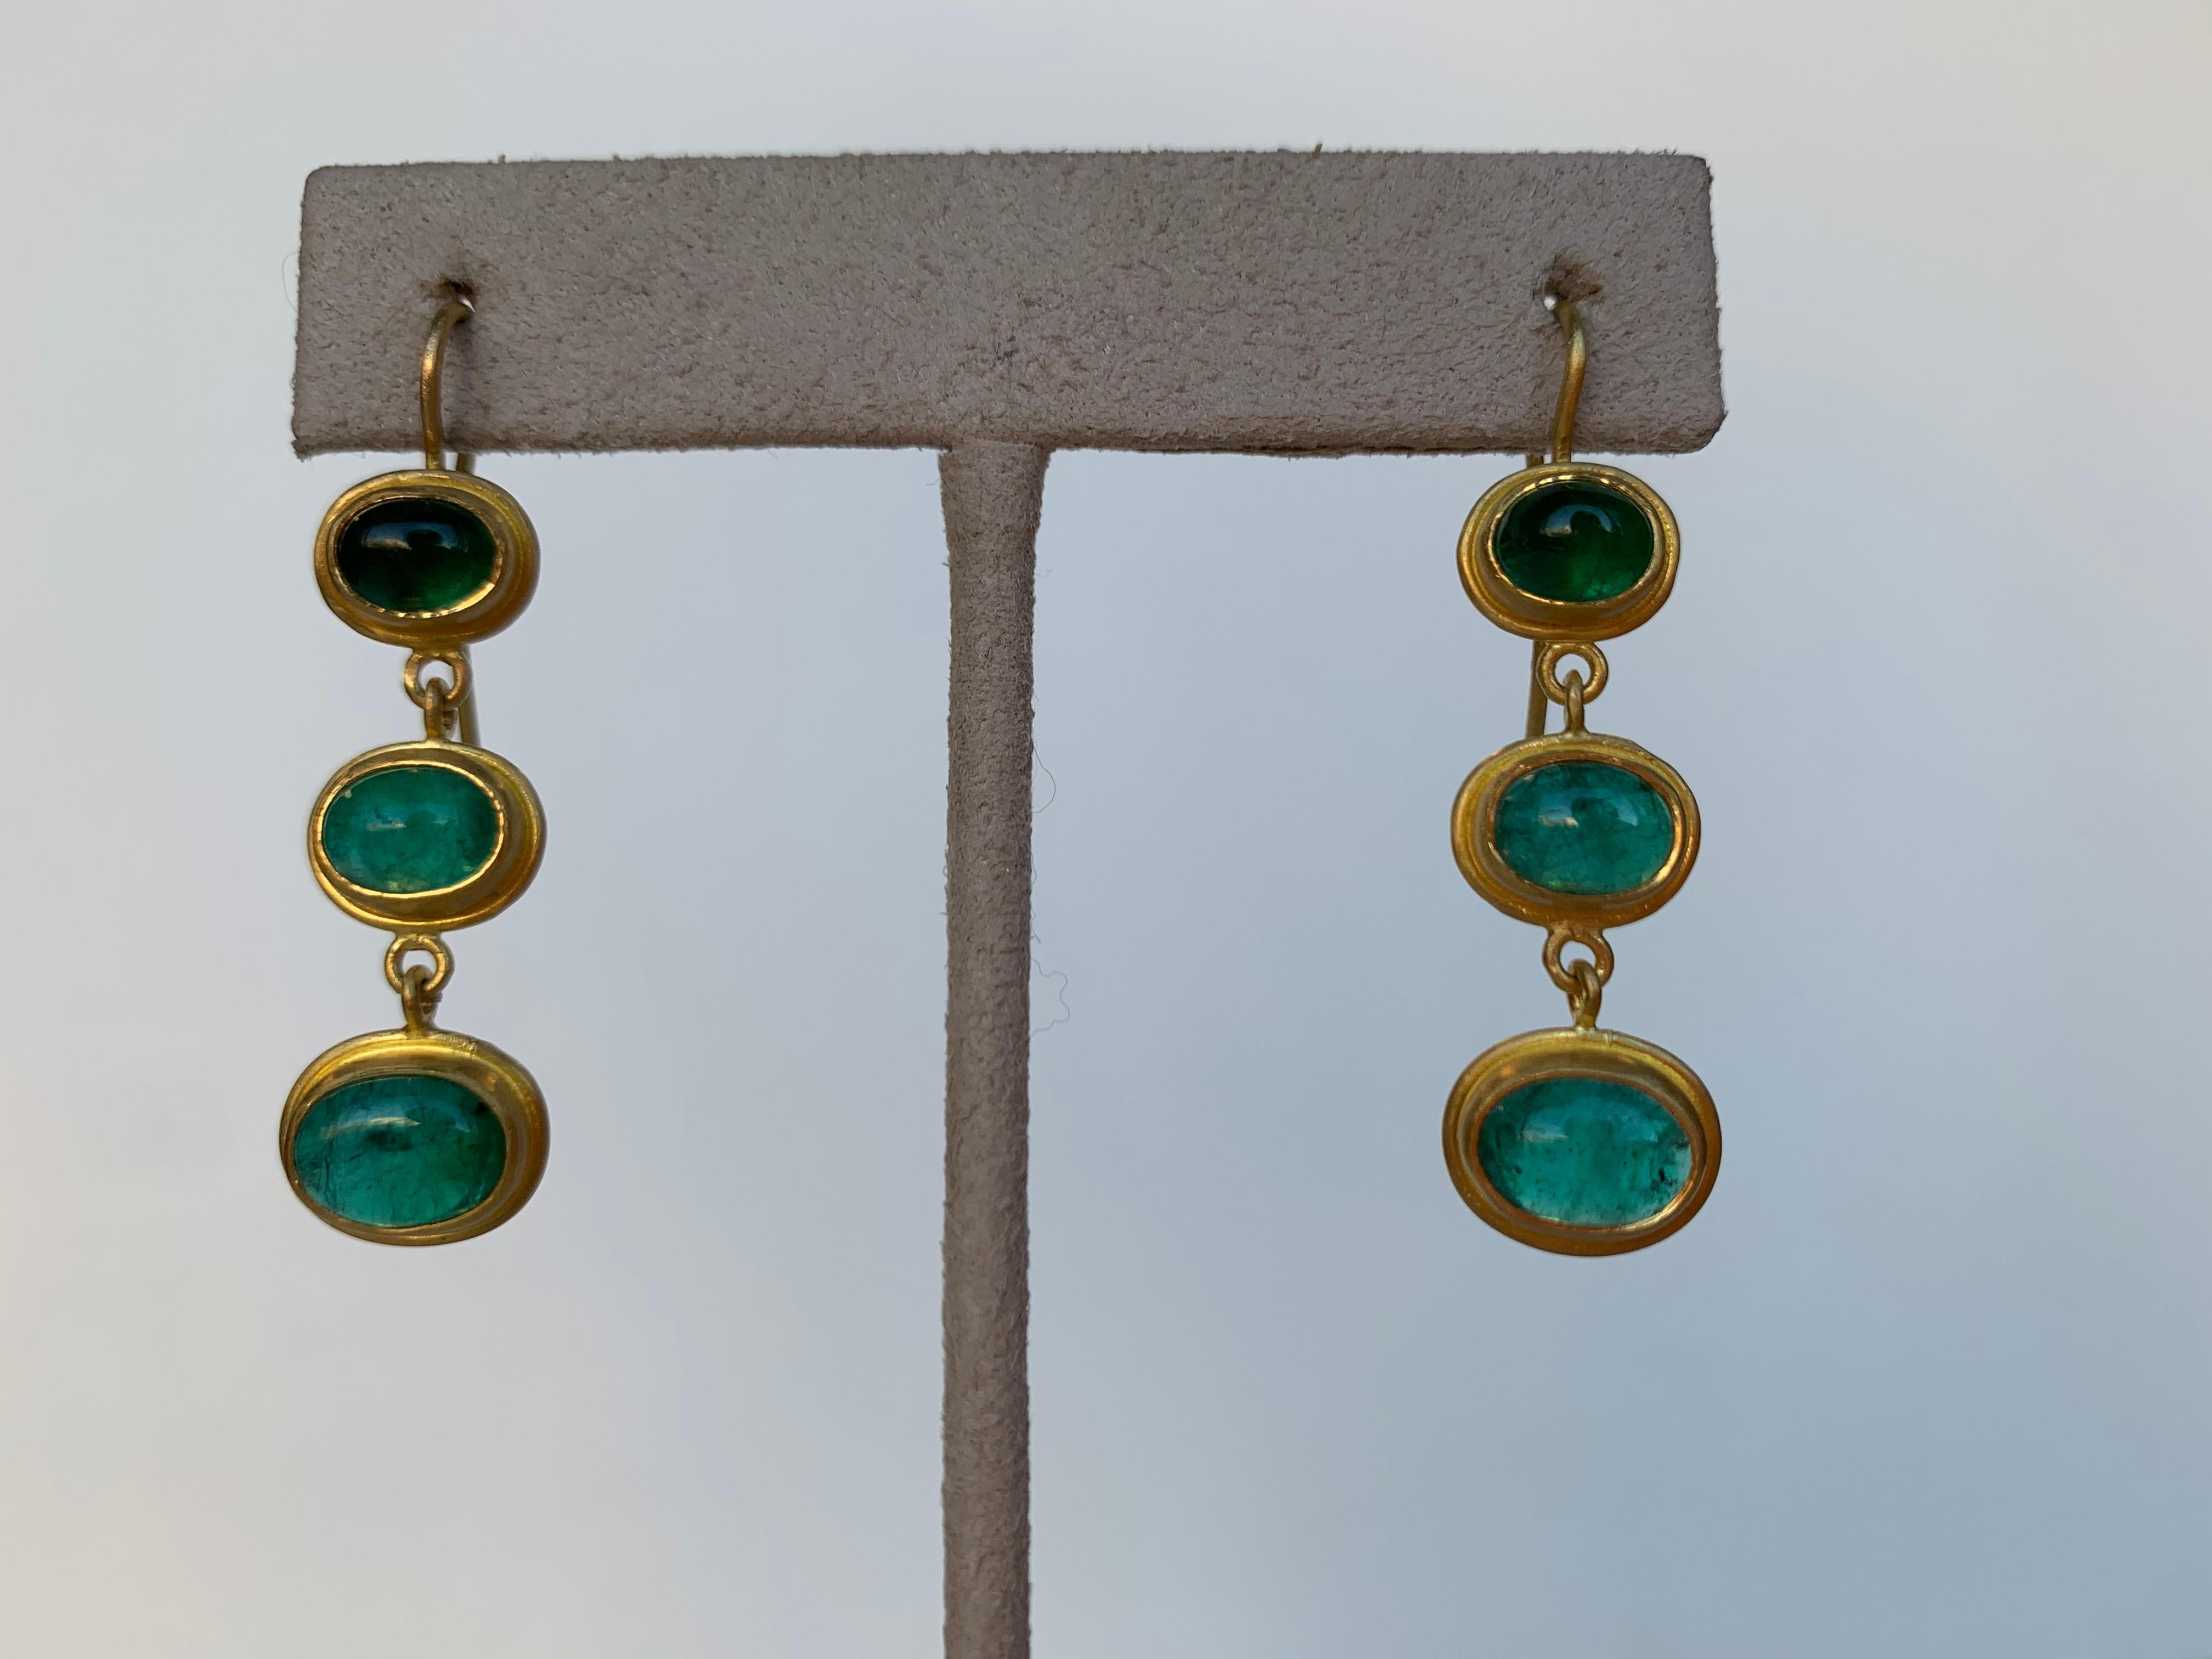 Emerald has been a source of fascination and reverence in many cultures for over six thousand years, sold in the markets of Babylon as early as 4,000 B.C. They have soothed and exited imaginations since antiquity, the green color was known to